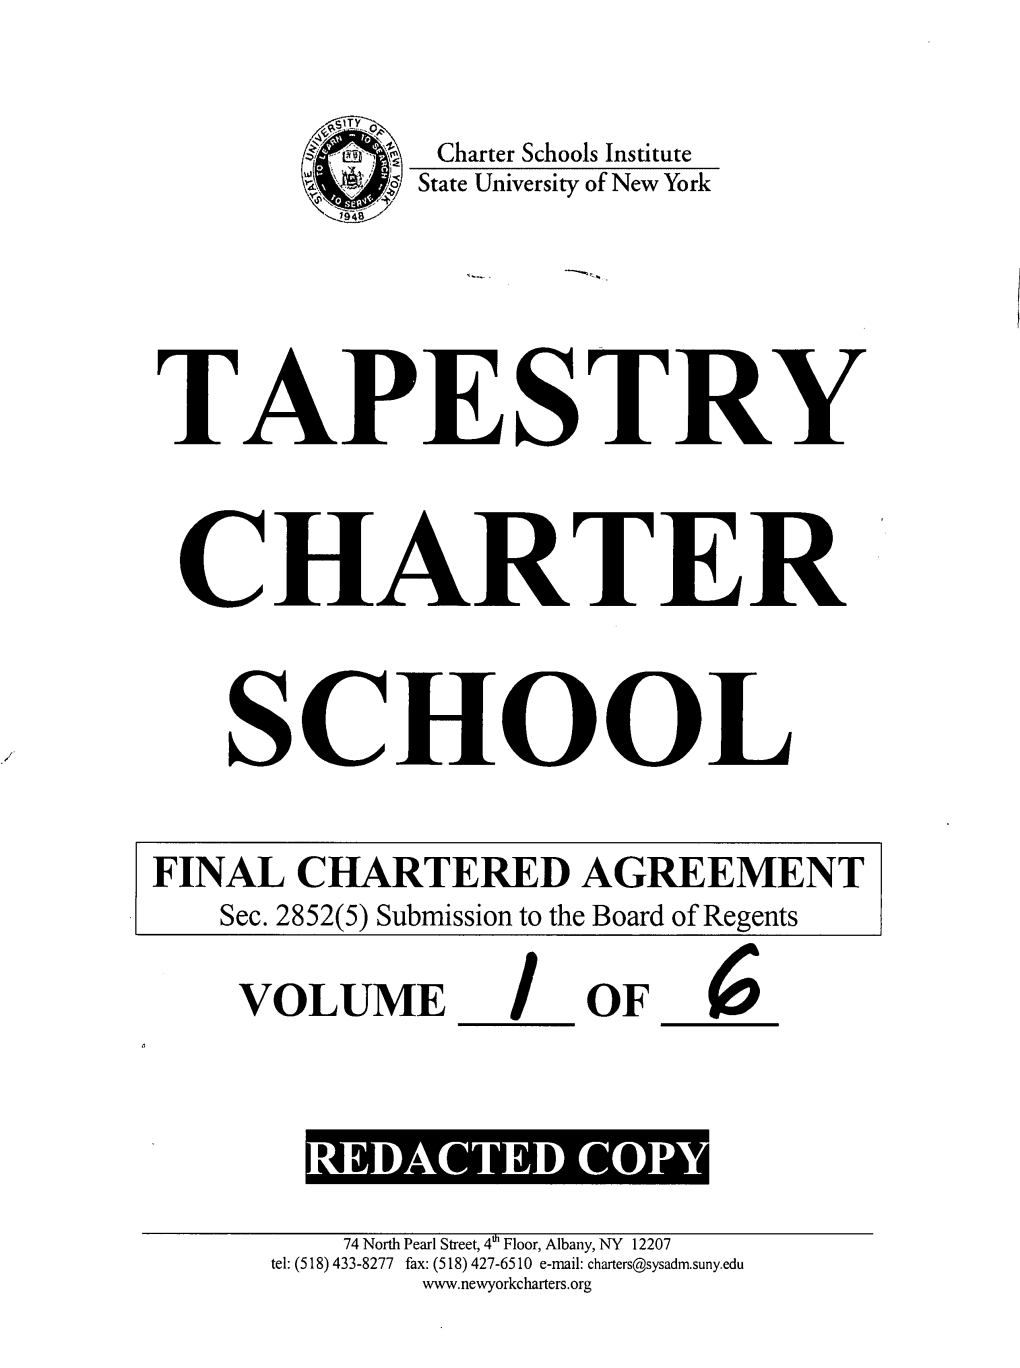 FINAL CHARTERED AGREEMENT VOLUME / of J& REDACTED